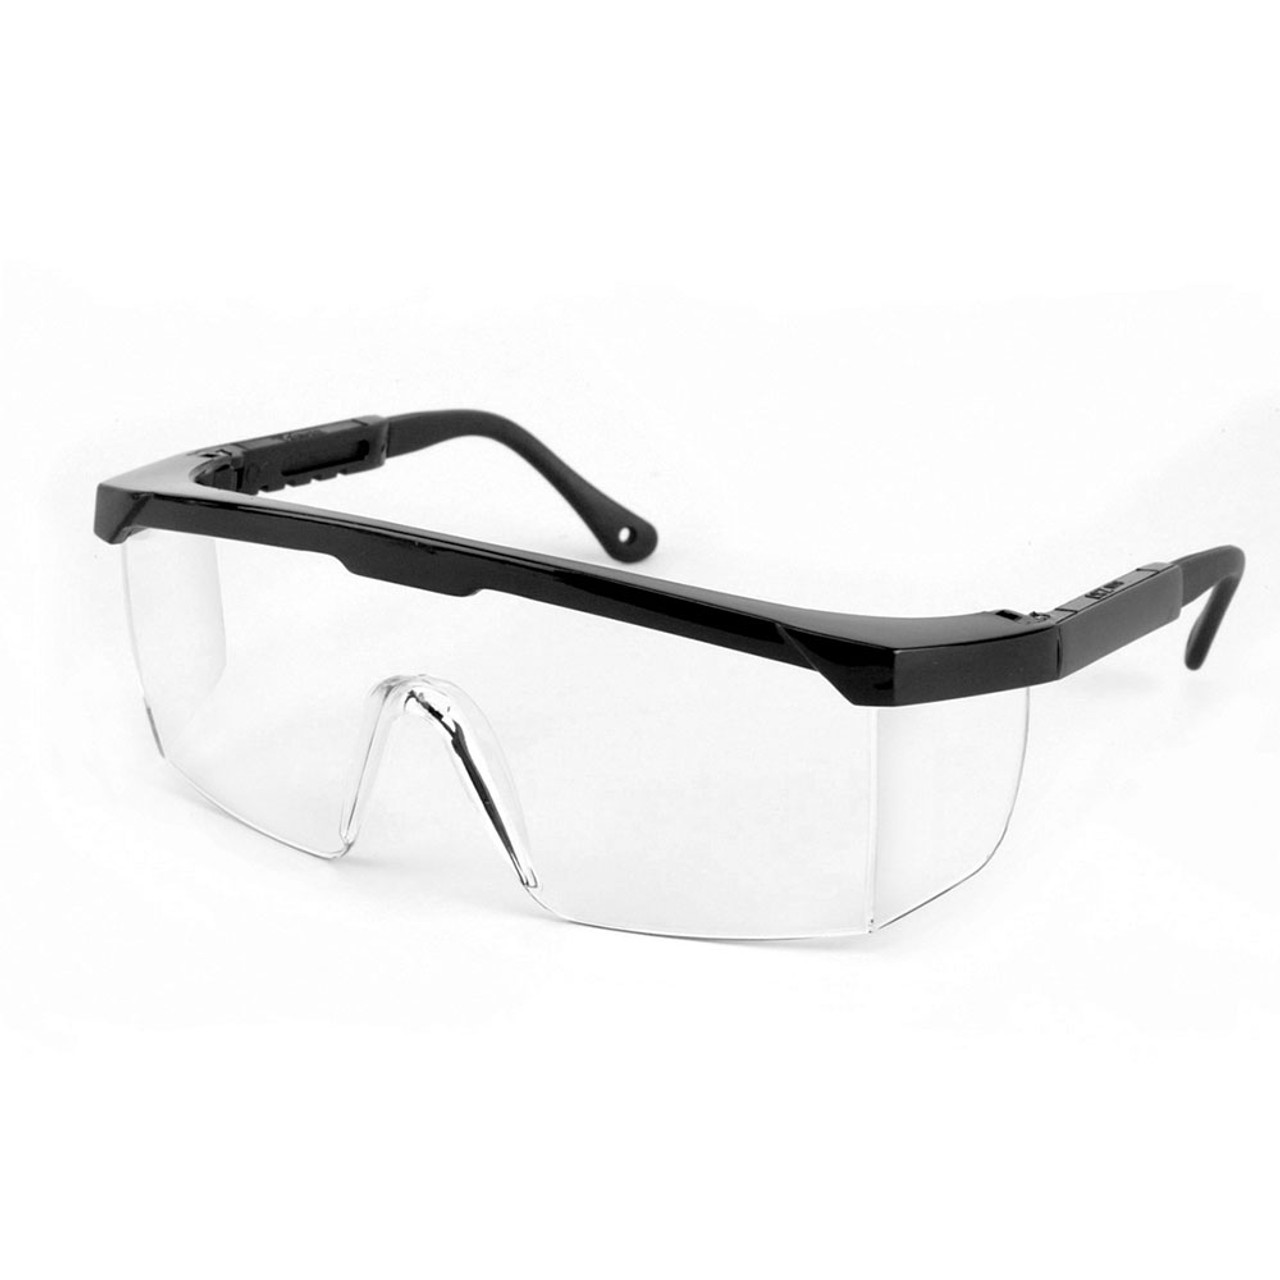 • Made using virgin, unitary polycarbonate lenses
• Provides 99.9% UV protection
• Ideal for construction, shop and general eye protection applications
• Classic one-piece molded lens offers excellent front/side protection
• Lightweight, comfortable and very affordable
• Arms are extendable for maximum fit and comfort
• S73801 offers same features but with a smaller frame for narrow faces
• Meets ANSI Z87.1-2015 standards and cUL certified to CAN/CSA Z94.3-2015 standards